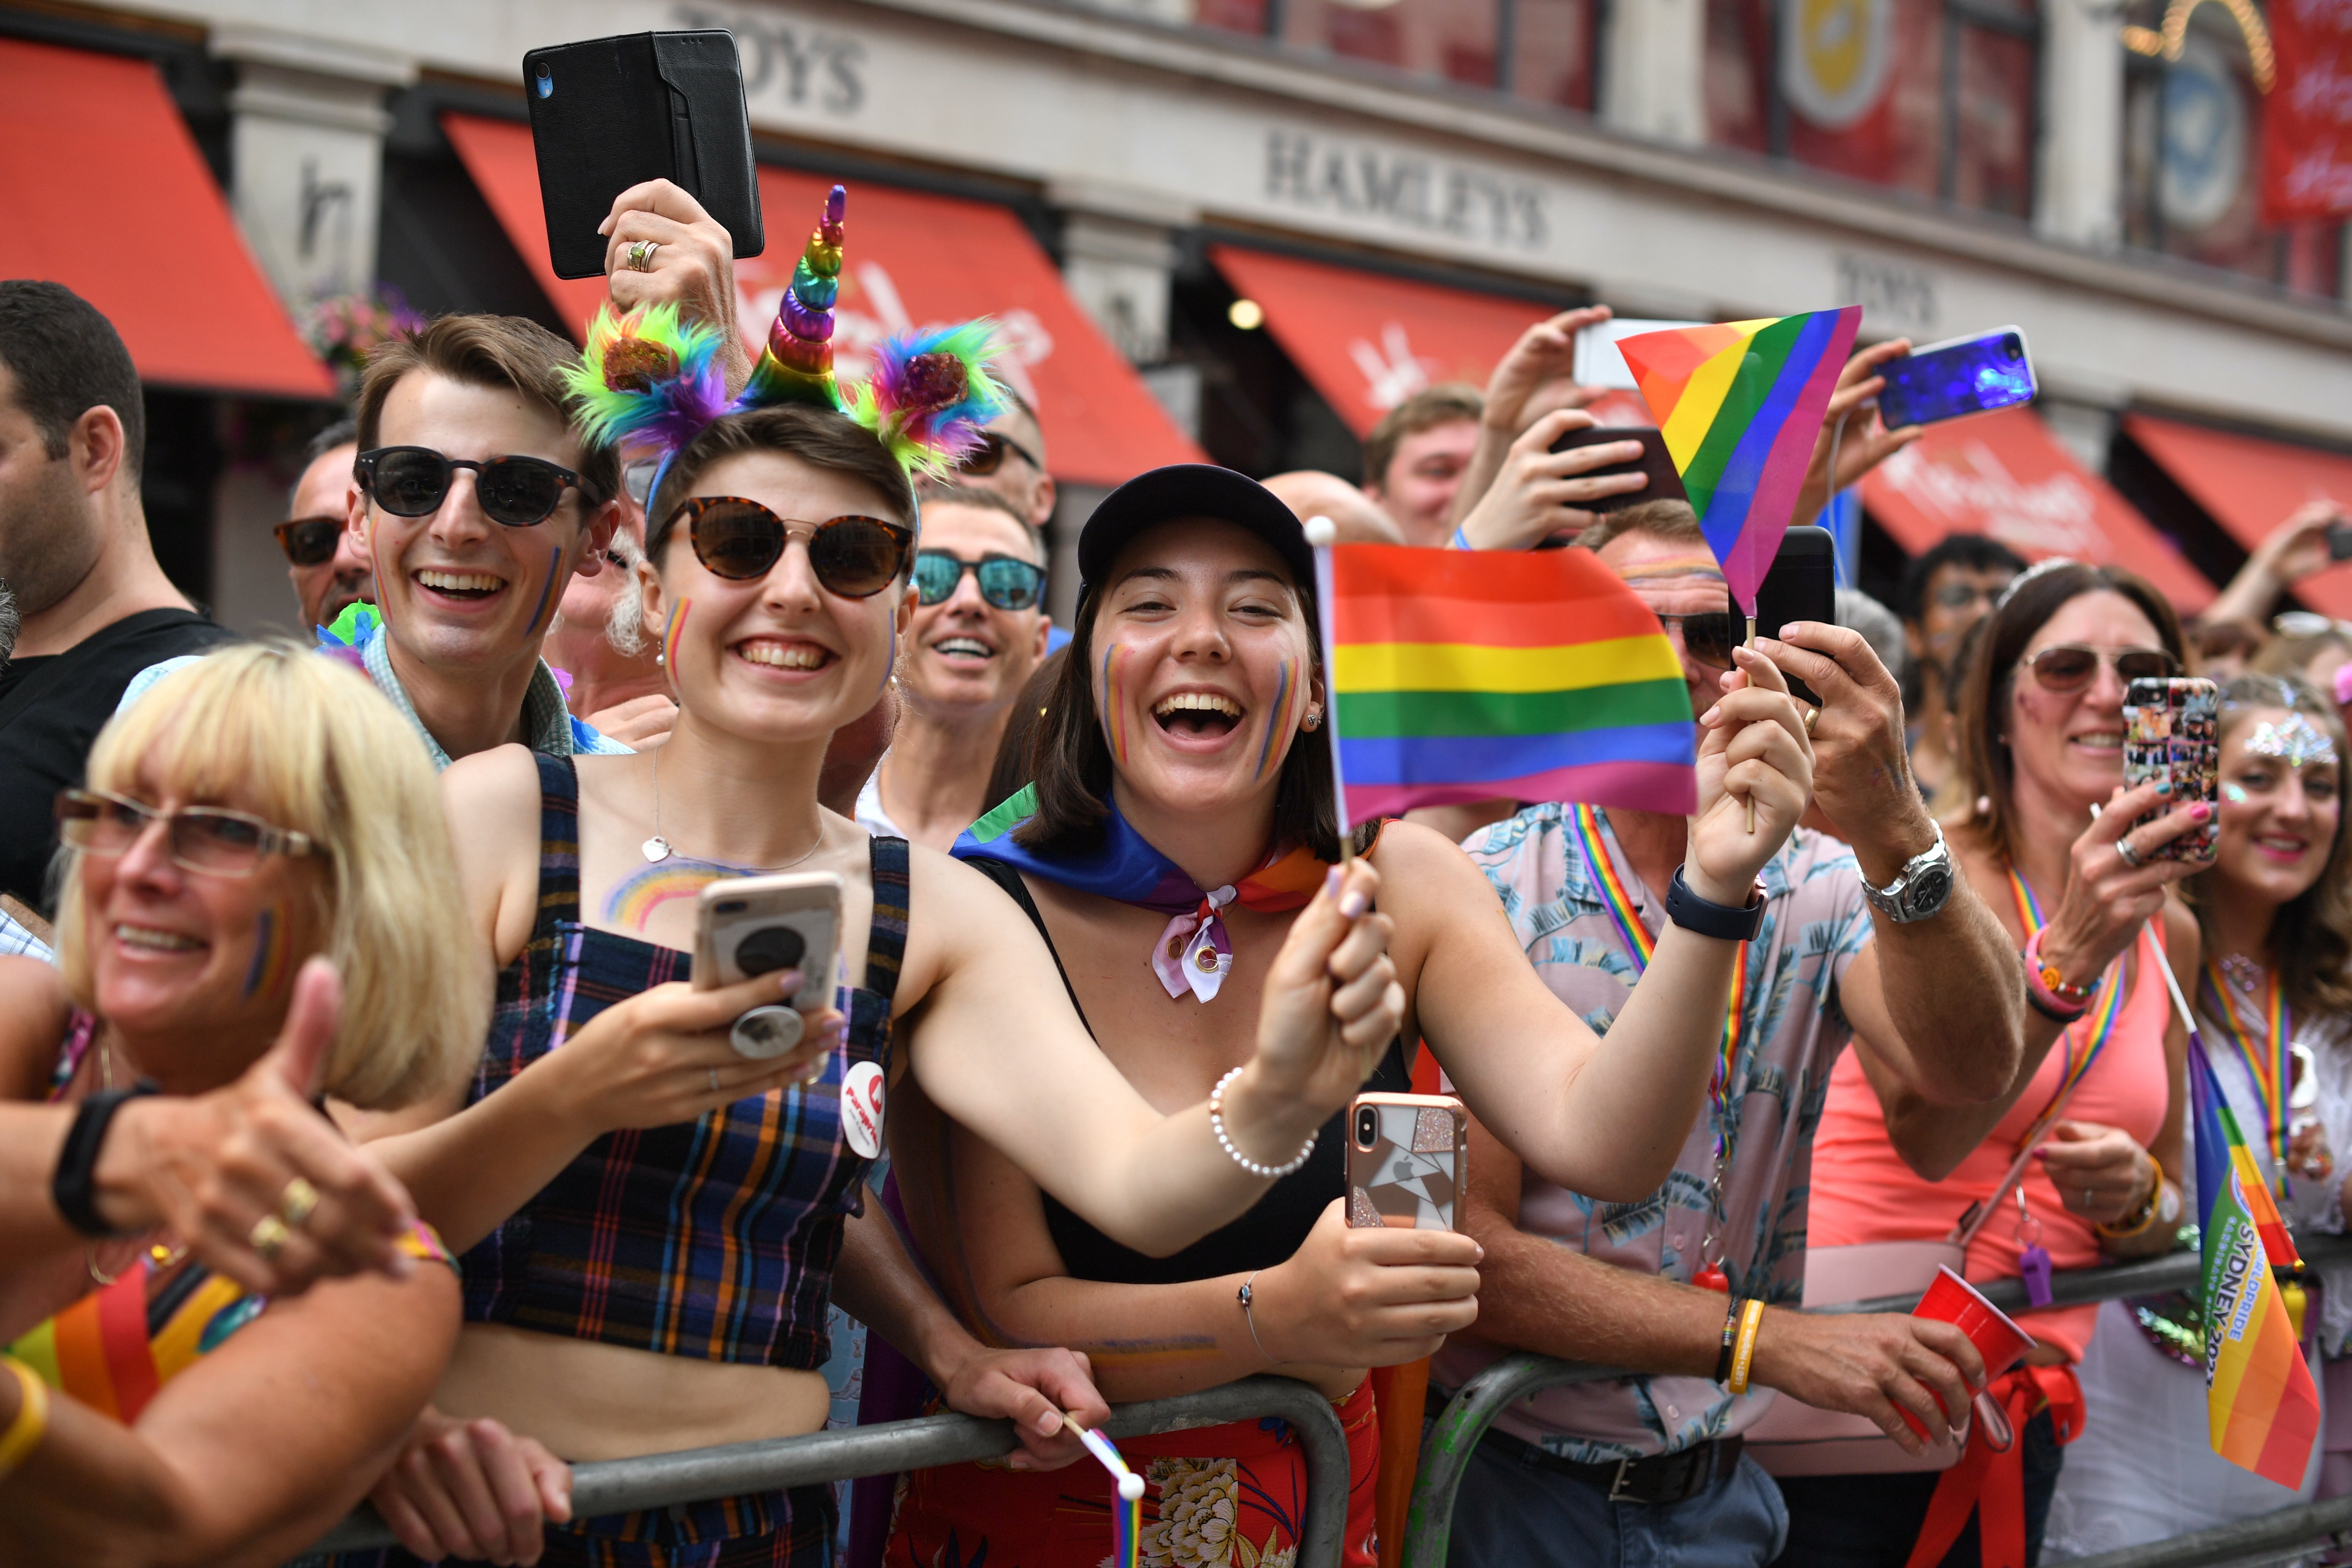 More than a million people are expected to descend on the capital for Pride in London on Saturday (Dominic Lipinski/PA)